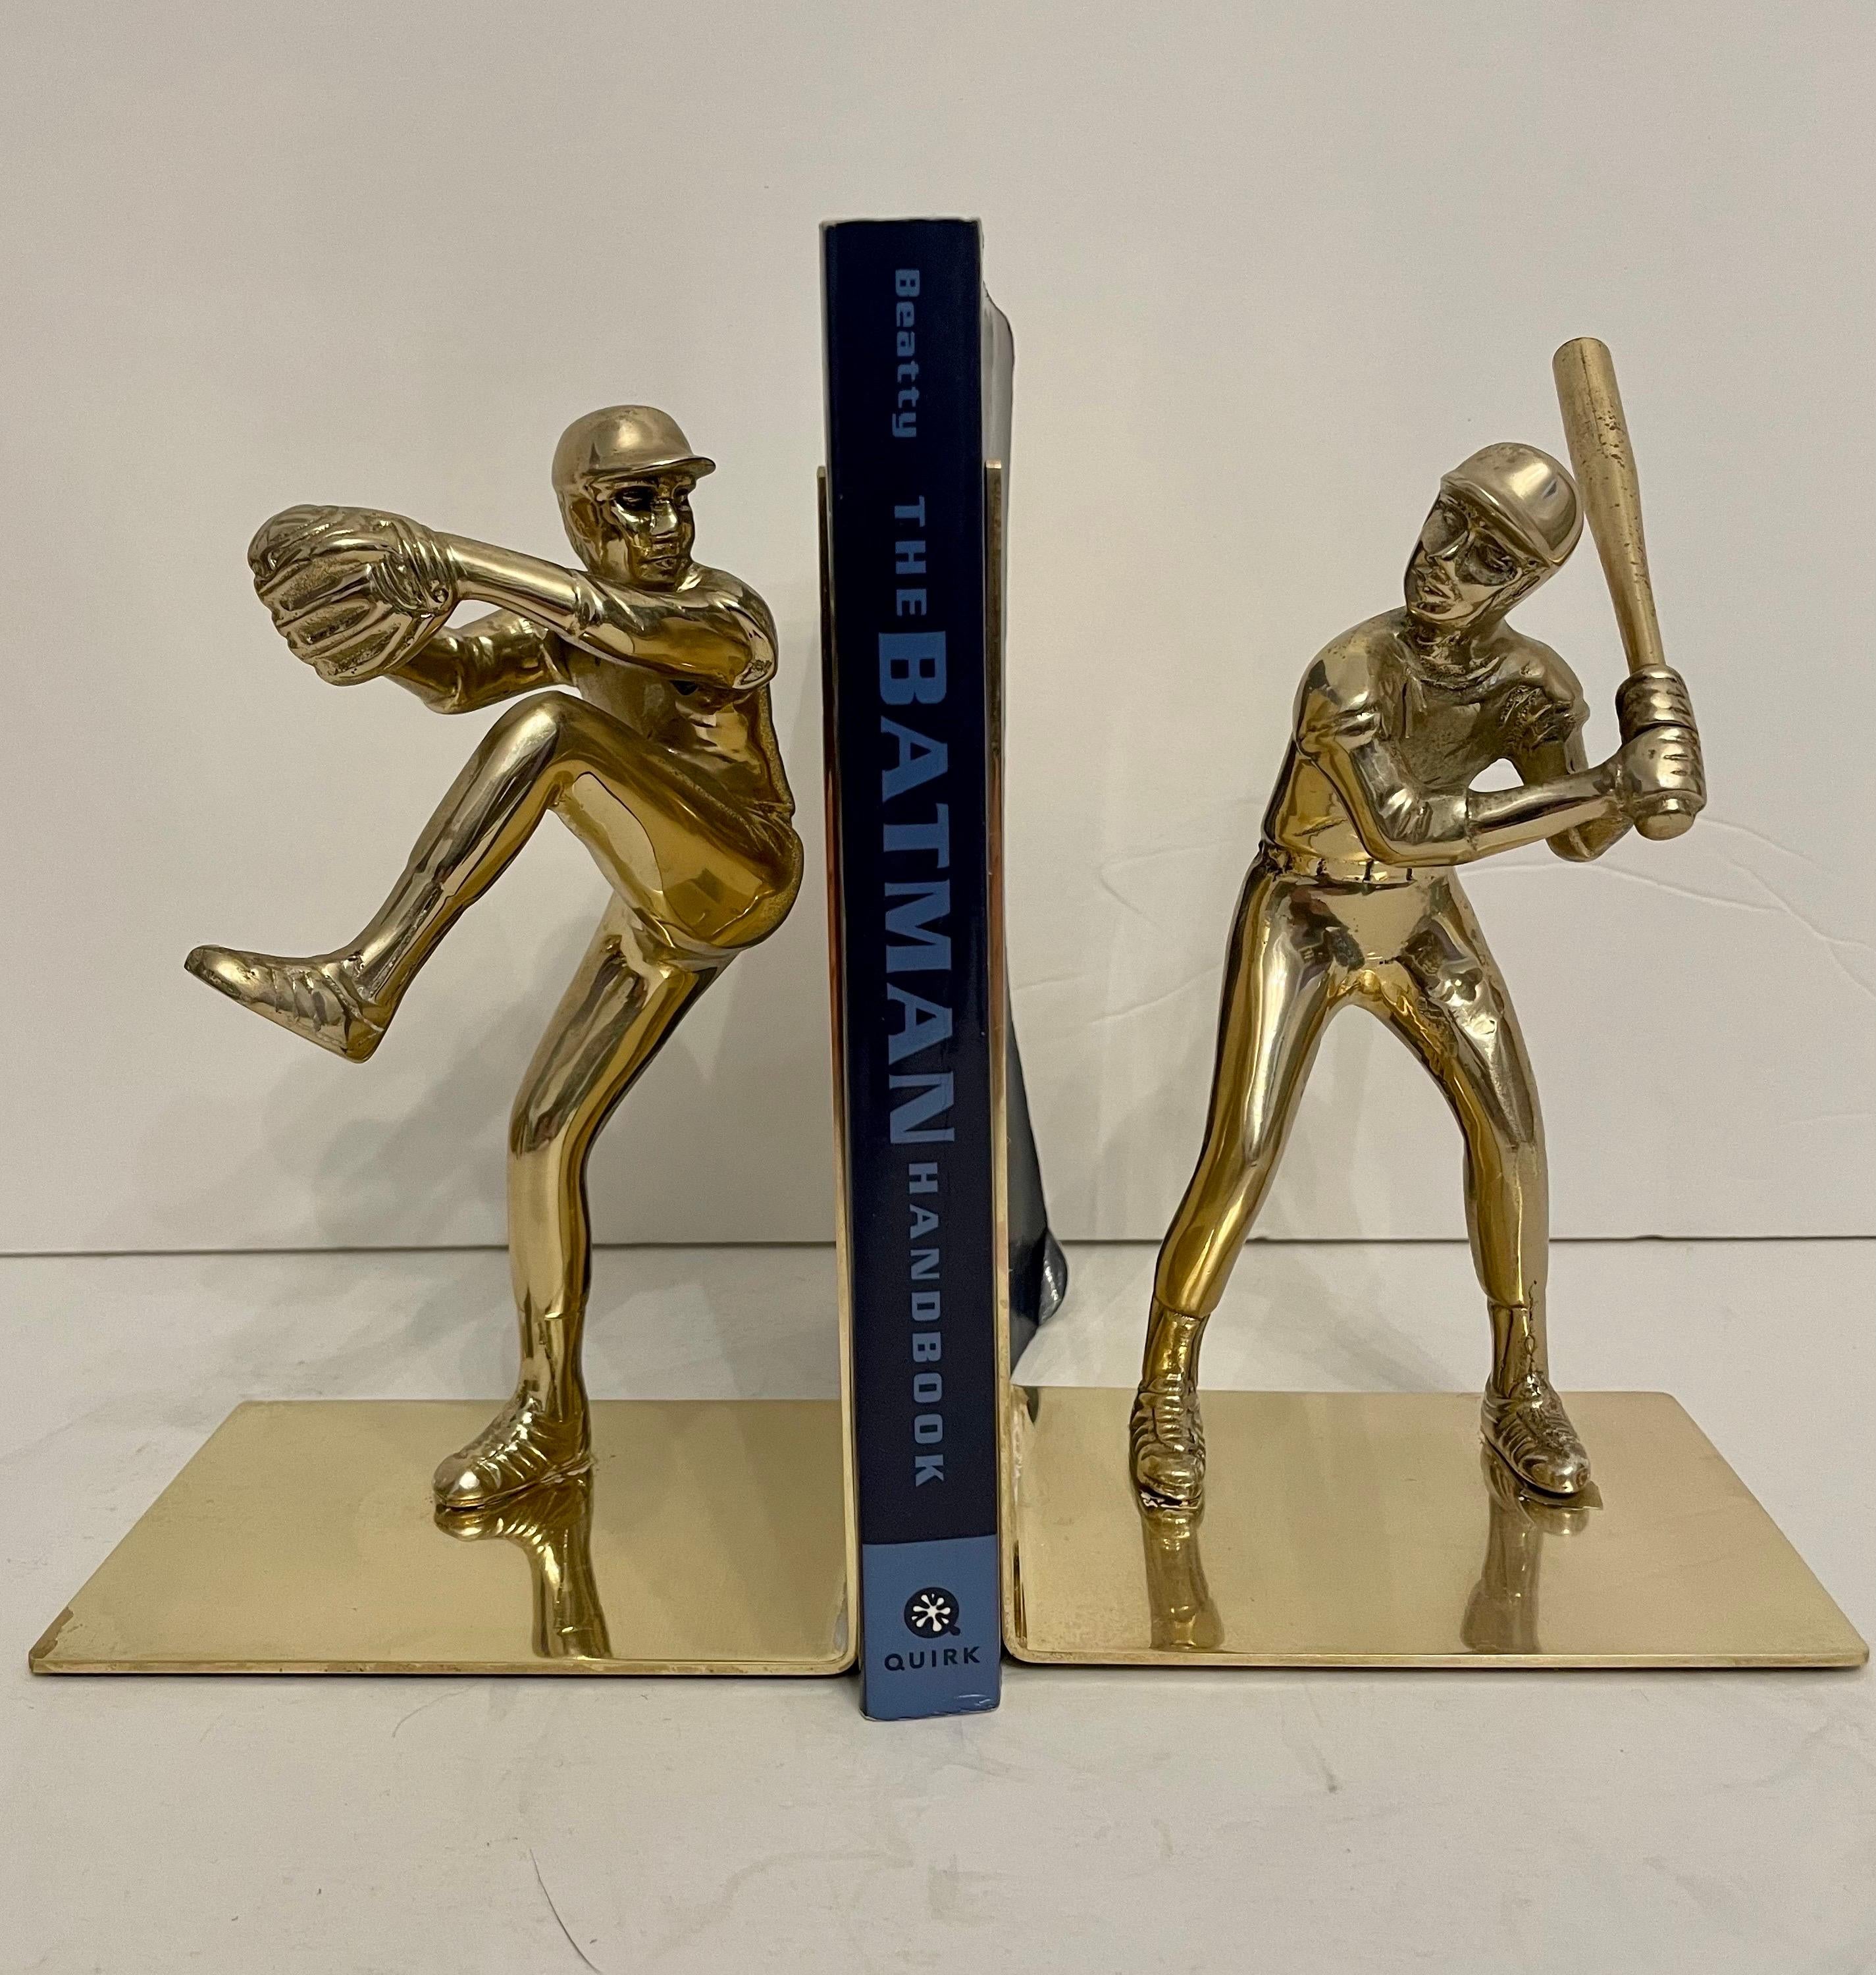 Pair Of Large Solid Brass Baseball Players Bookends. Nice detail in casting of a pitcher and a batter, heavy weight with substantial feel. Holds a shelves worth of books. Good condition, some light patina in a couple of spots. Great for your beach